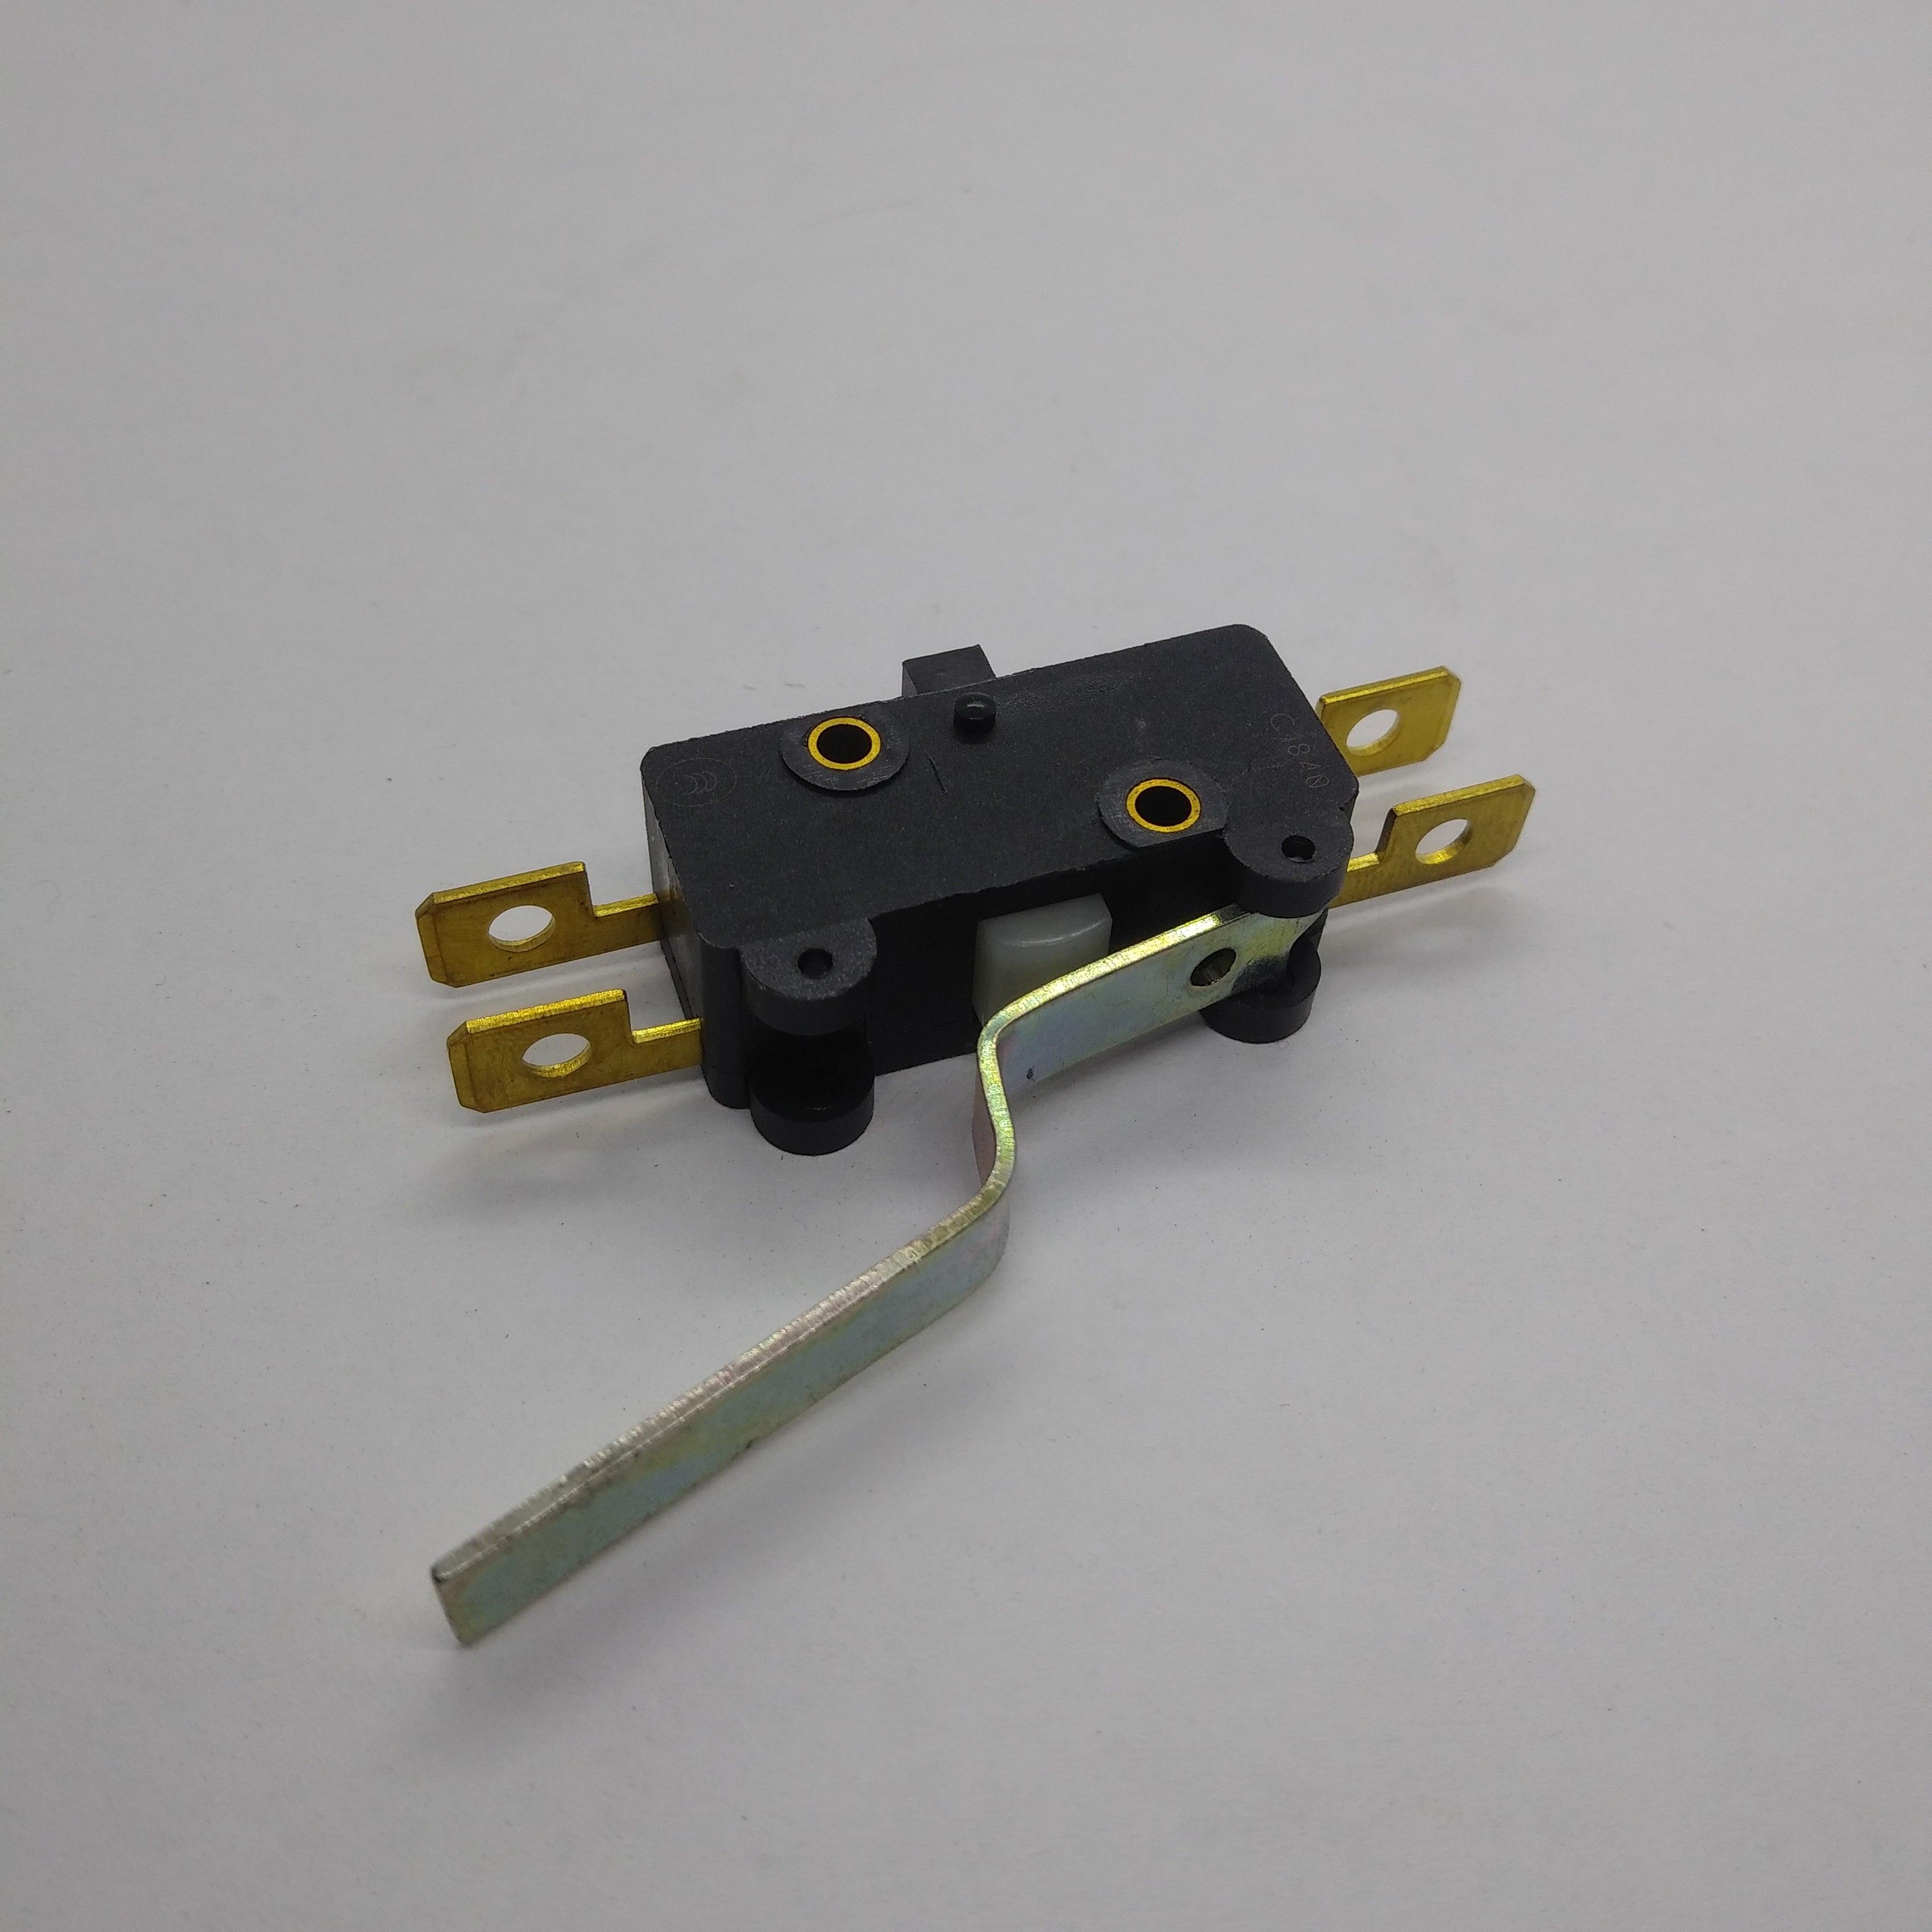 RSPM050  SAFETY MICRO SWITCH / EX PART: 35 /    #04.BA0257.001 - AMPTO